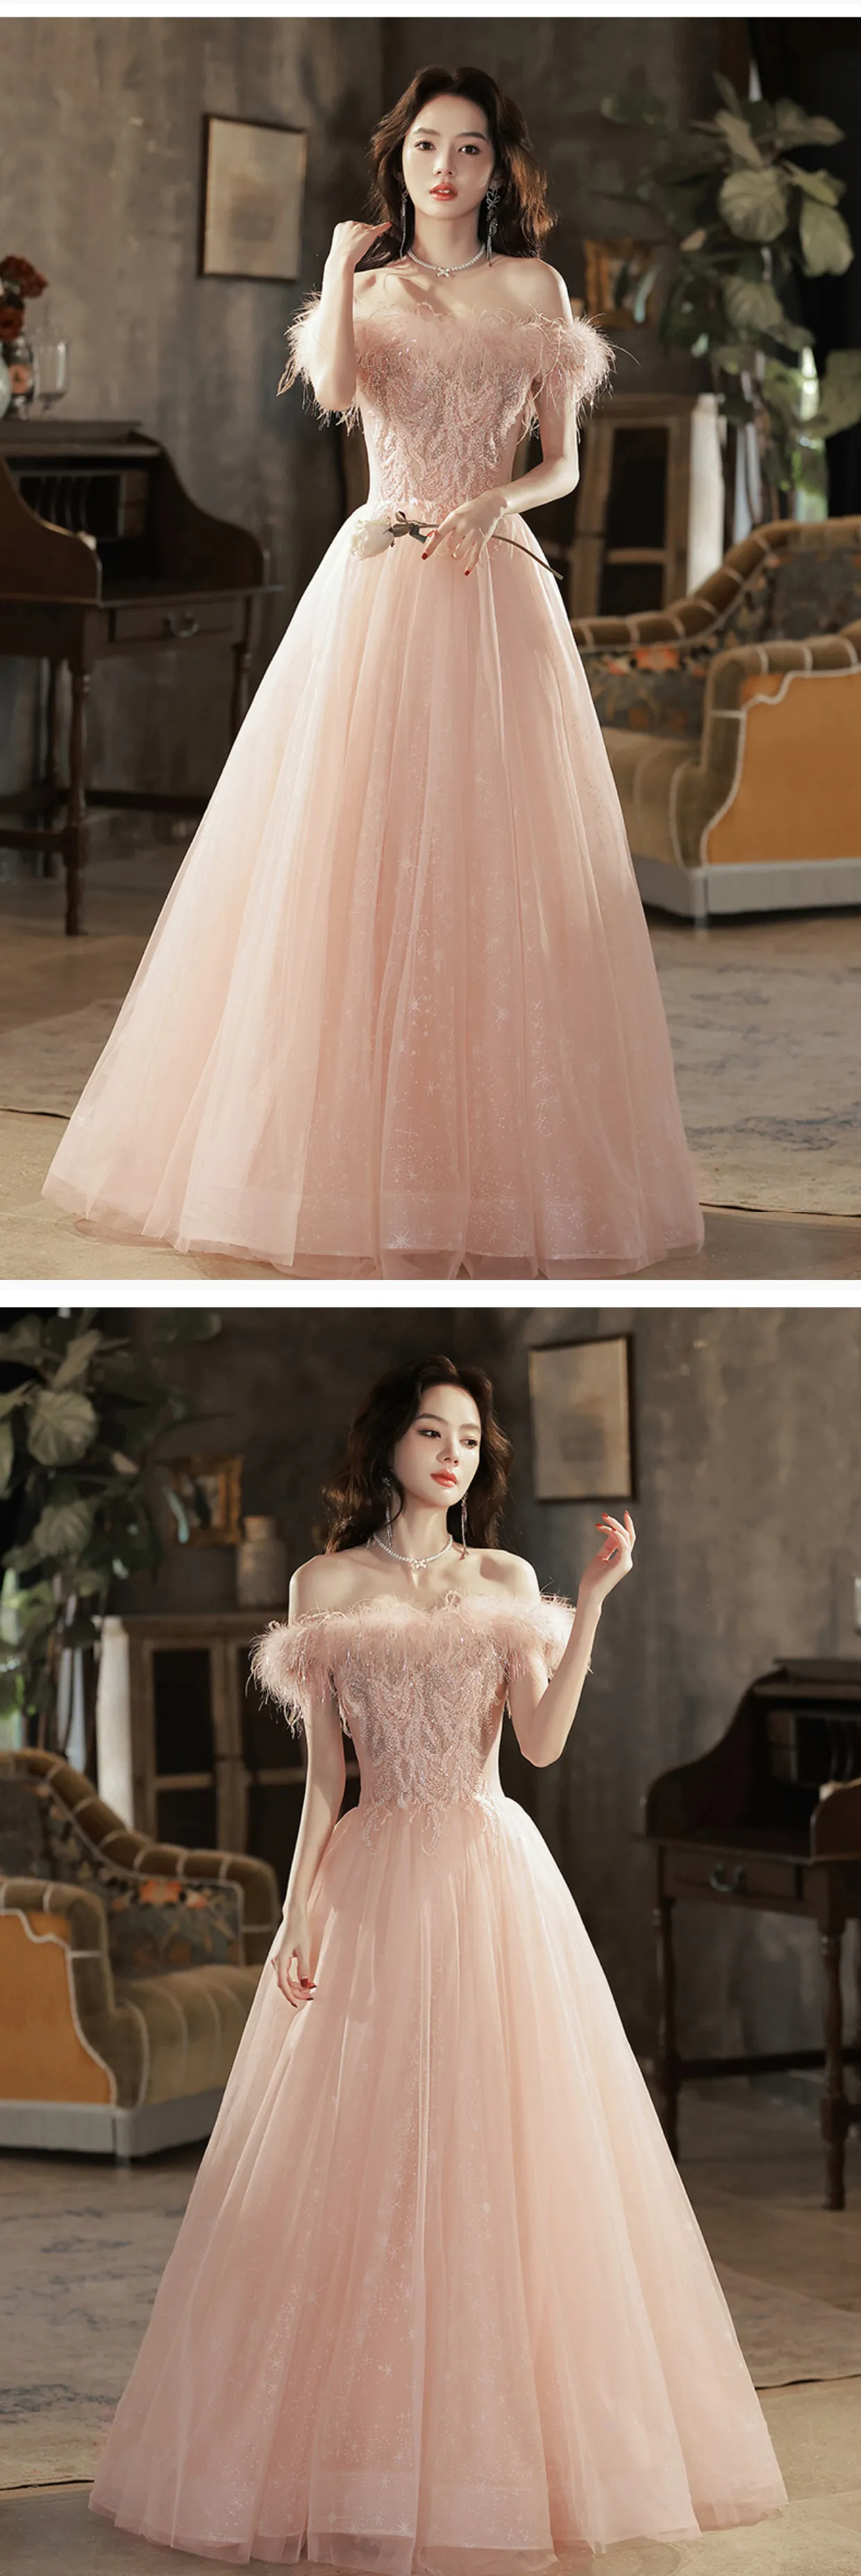 Pink-Off-Shoulder-Feather-Cocktail-Party-Prom-Dress-Evening-Gown12